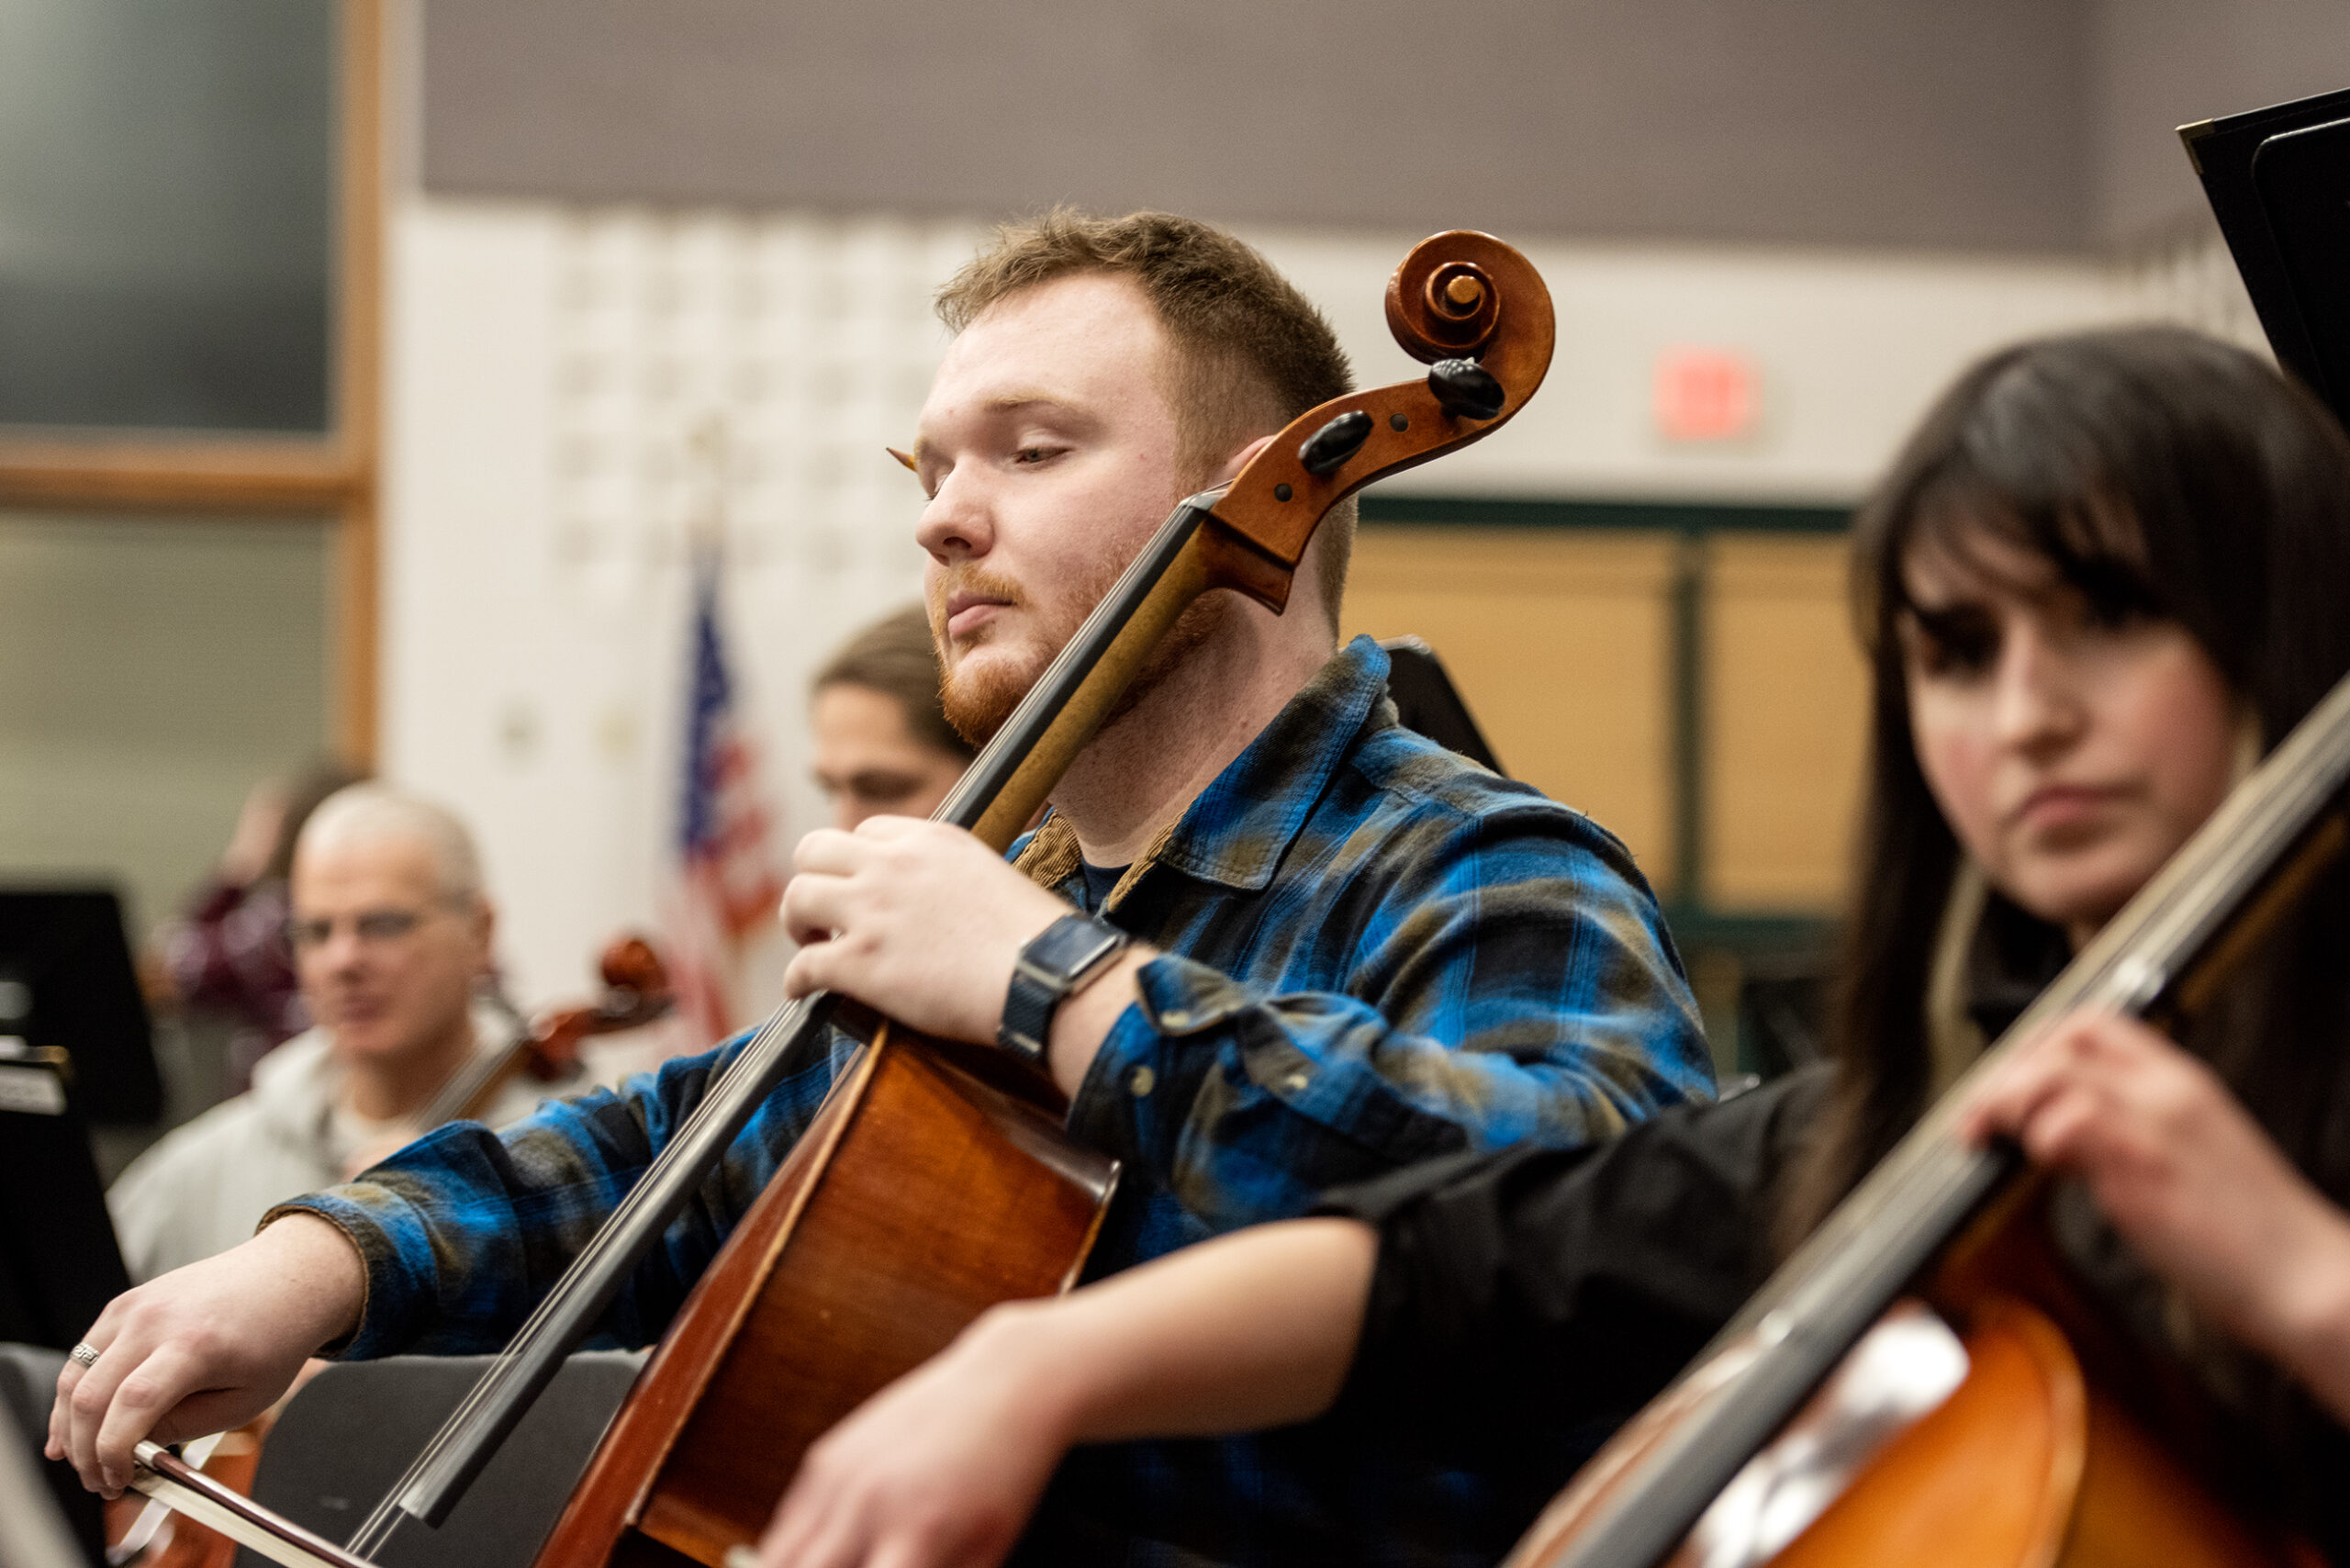 A musician plays the cello while sitting with other musicians in practice.